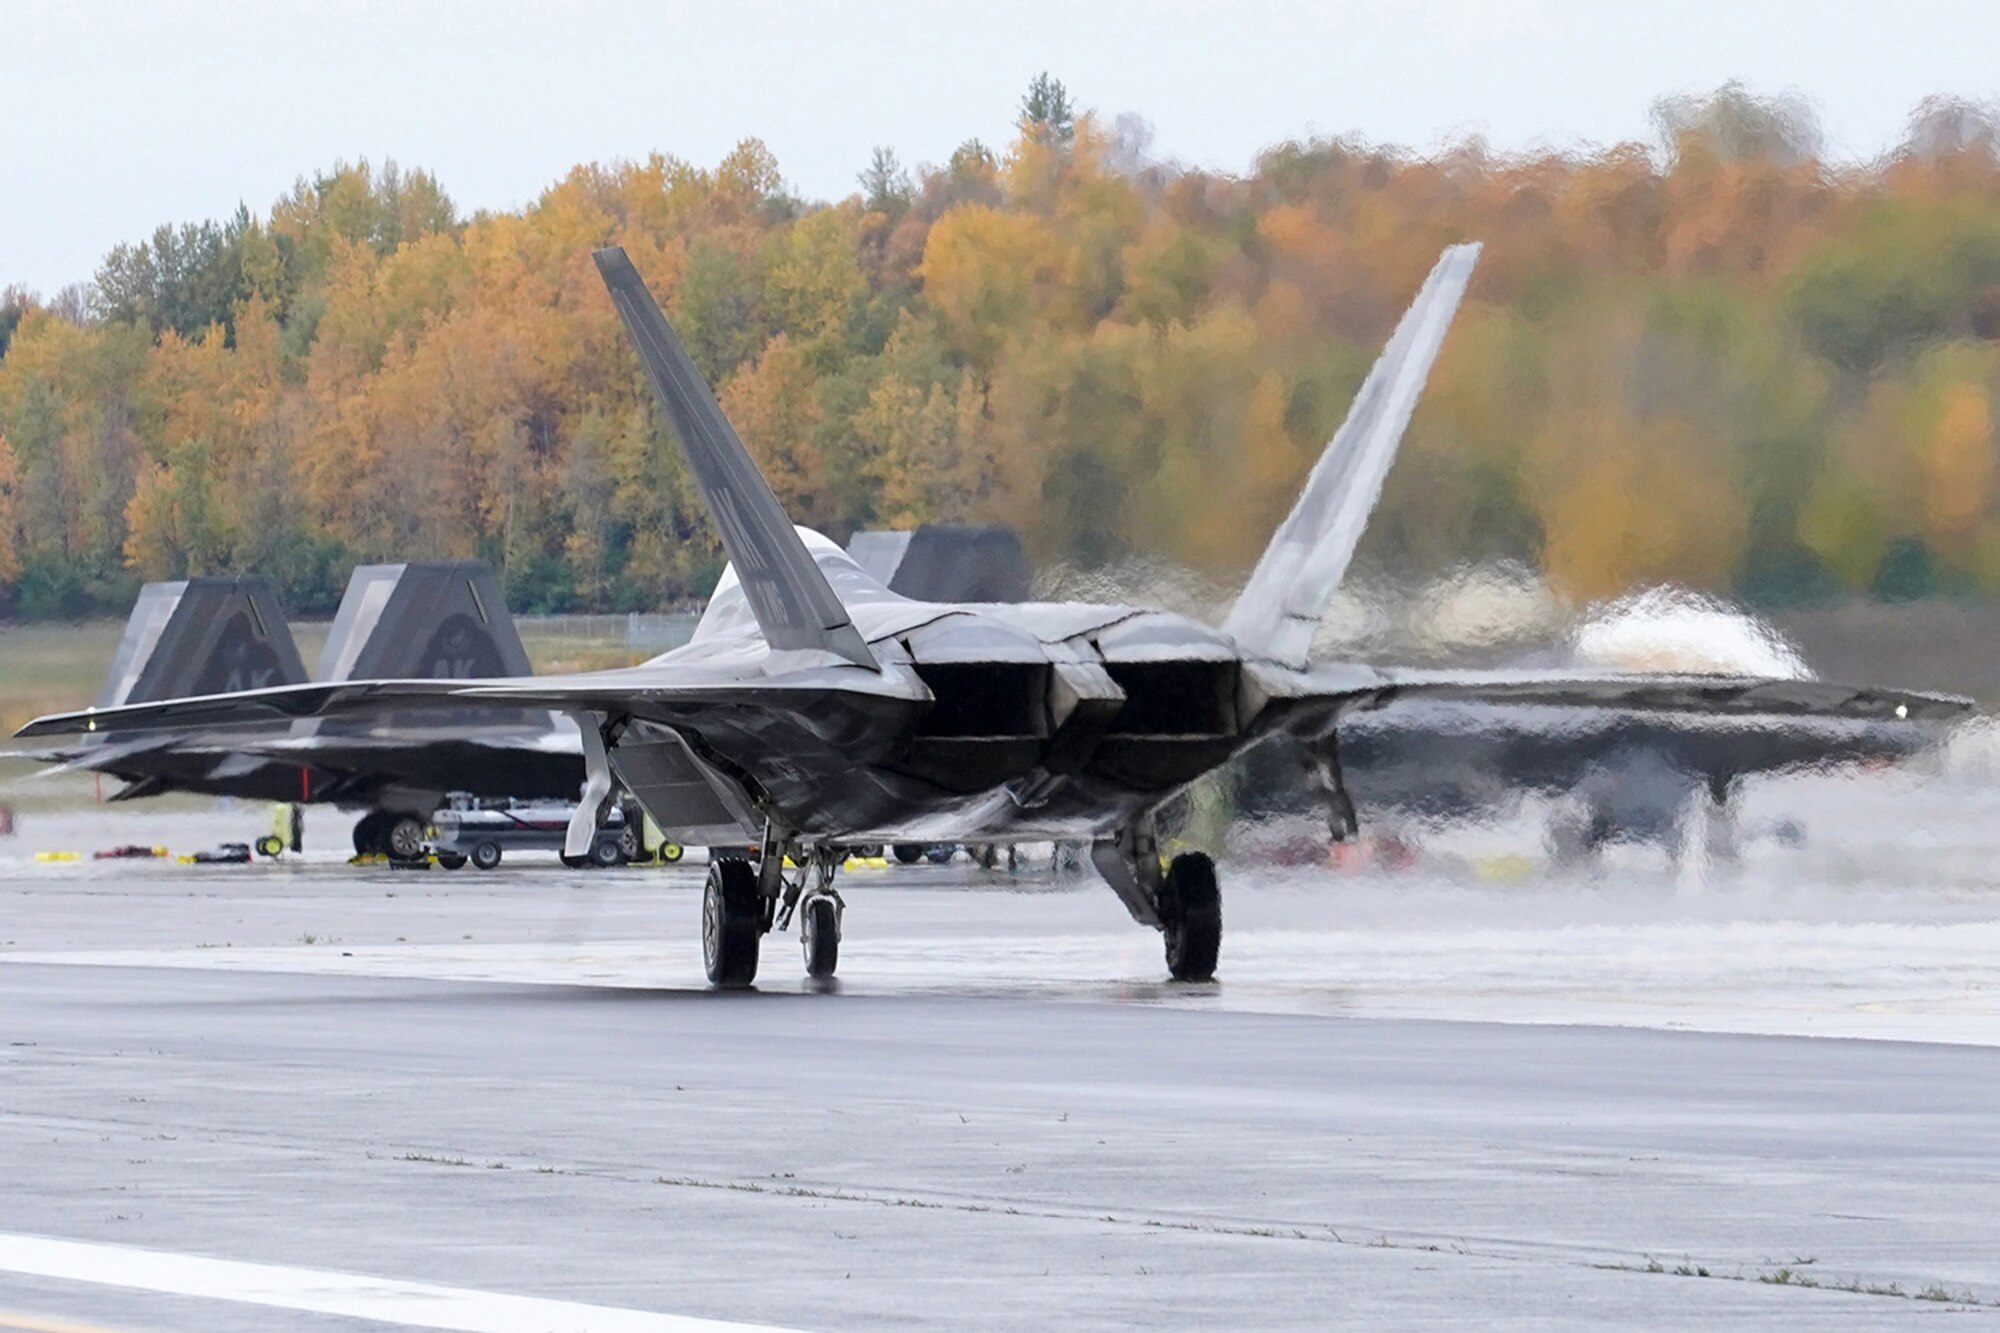 An F-22 Raptor of the 3rd Wing taxis on Joint Base Elmendorf-Richardson, Alaska, Oct. 2, 2019, while participating in the Polar Force 20-1 exercise. Polar Force 20-1 is designed to exercise multiple elements of the Agile Combat Employment (ACE) concept of operations, which include generating 5th Generation combat power from austere locations, command and control using non-traditional methods, and rapid airlift capabilities to sustain a forward operating location.  The ACE concept enables 3rd Wing to deliver lethal Airpower for America, even in a contested environment.